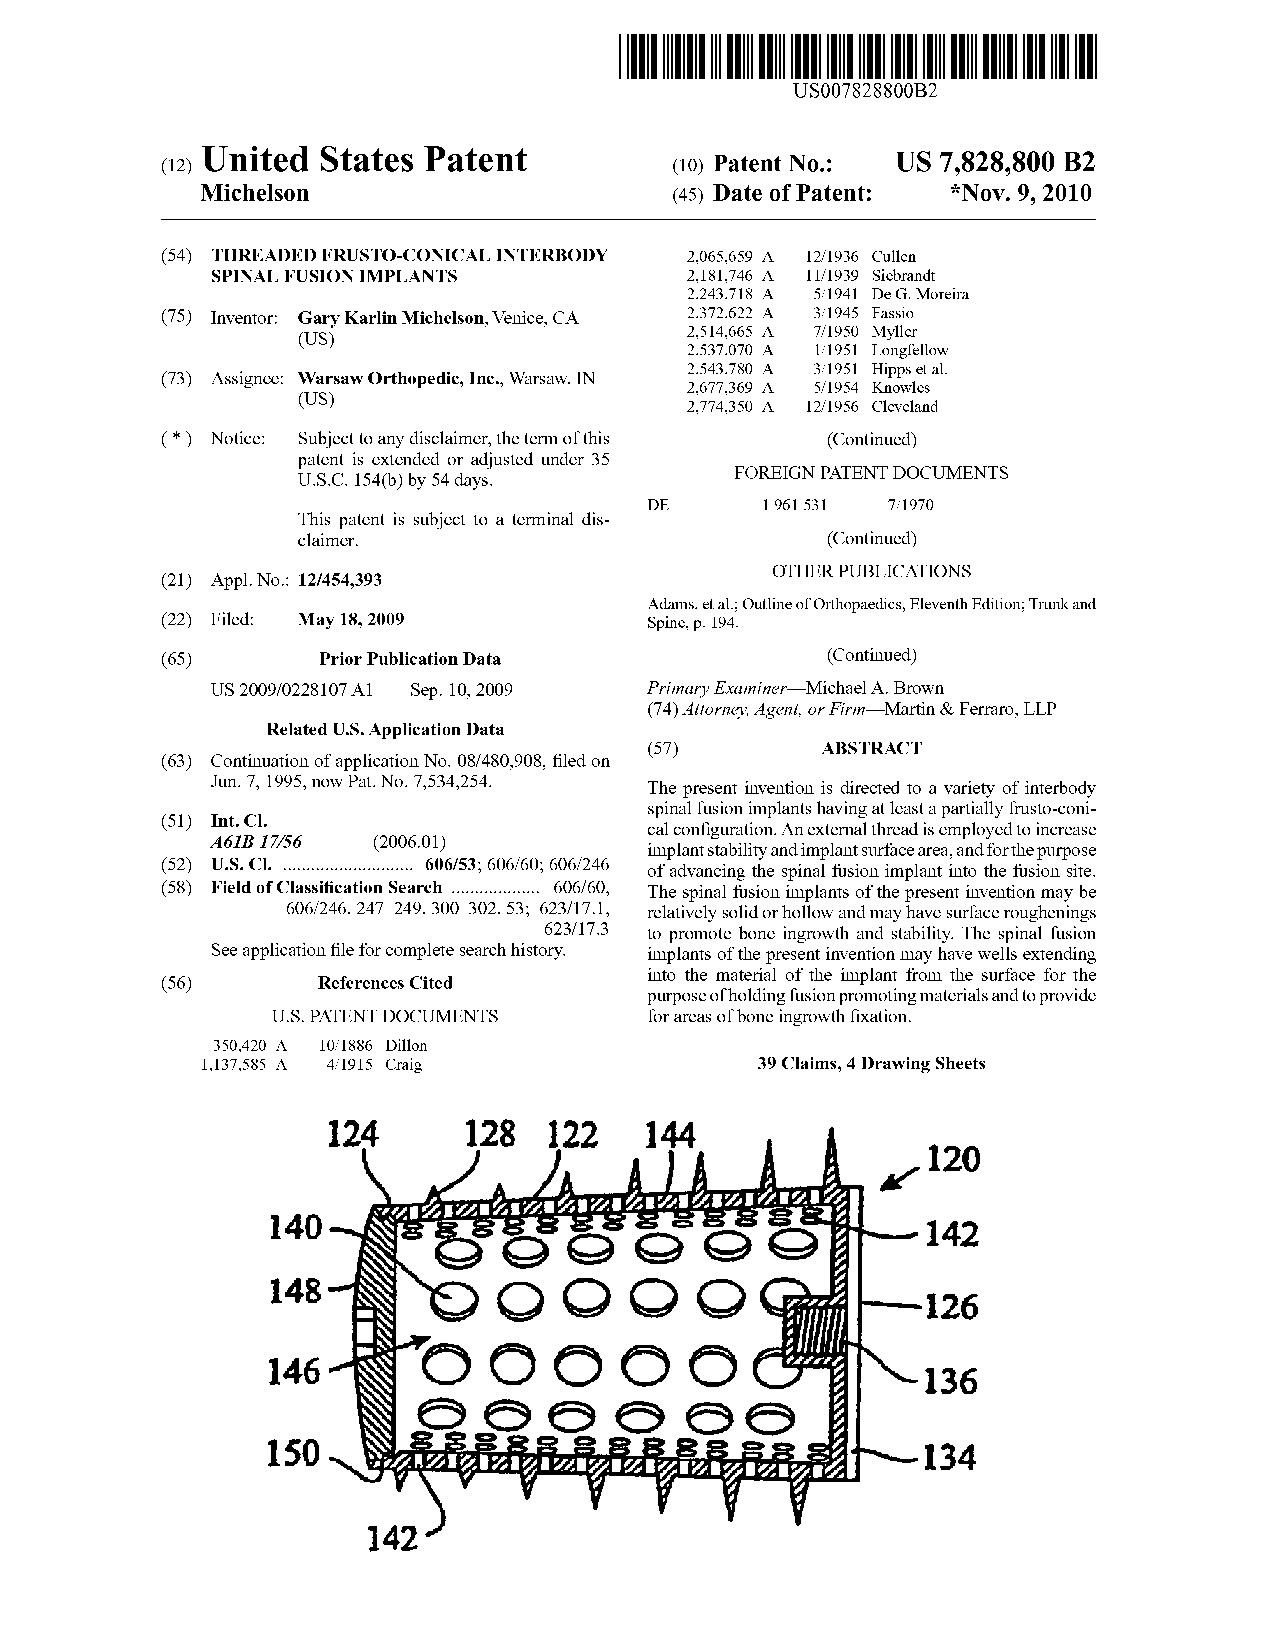 Threaded frusto-conical interbody spinal fusion implants - Patent 7,828,800